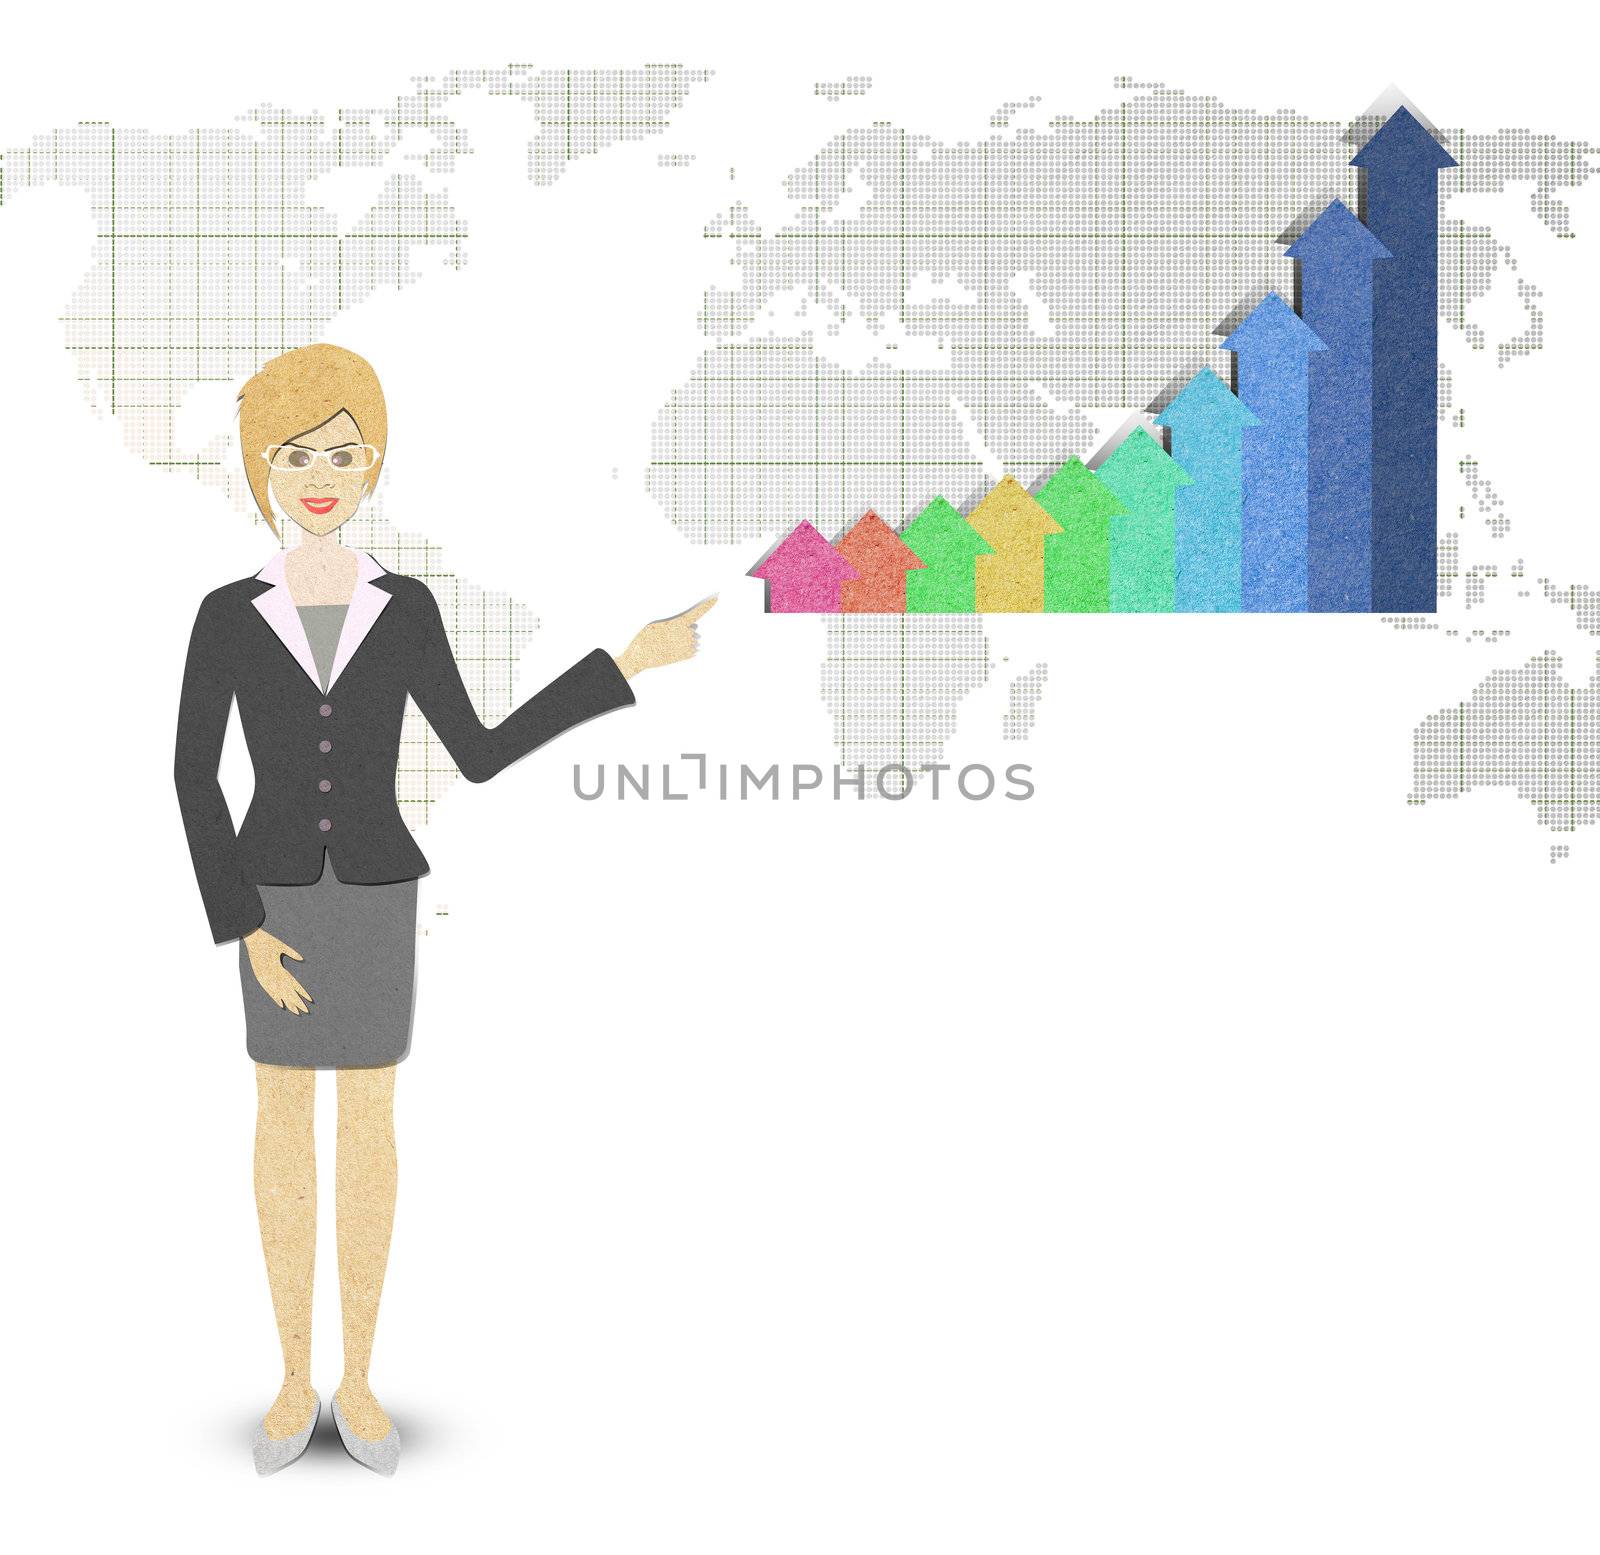 Business Woman papercraft  of a graph showing